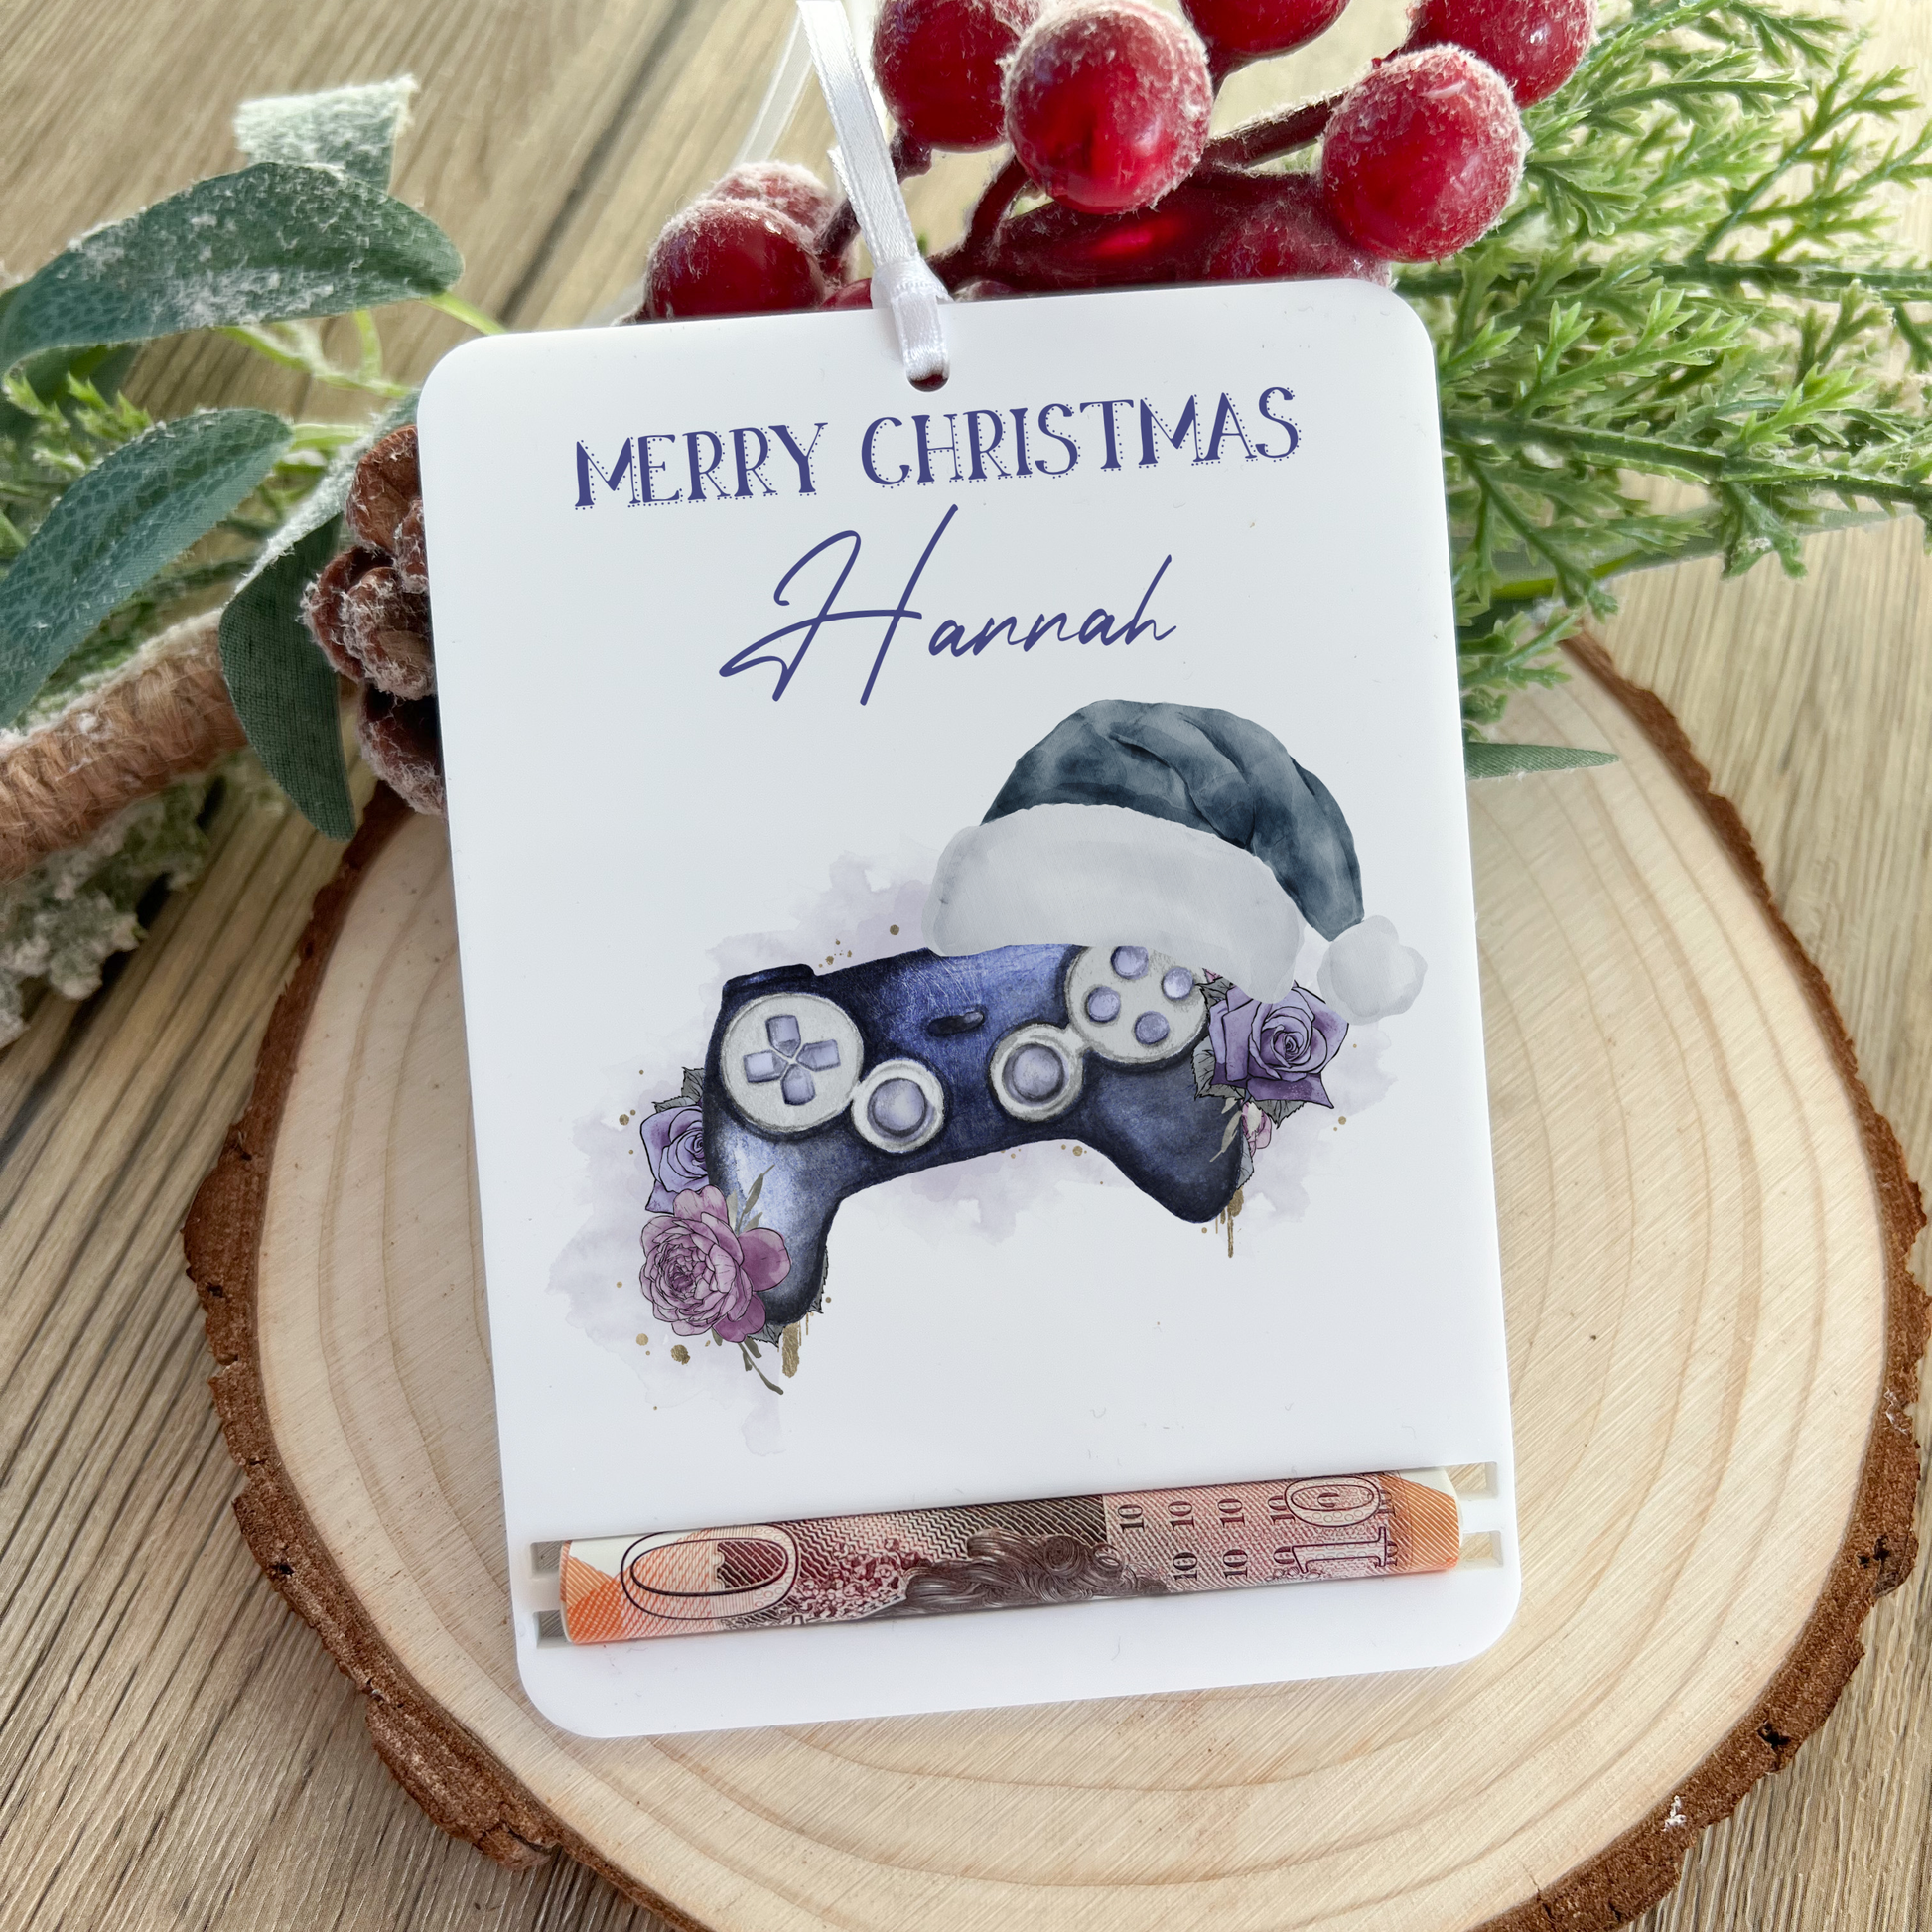 acrylic money holder with purple gaming design for Christmas